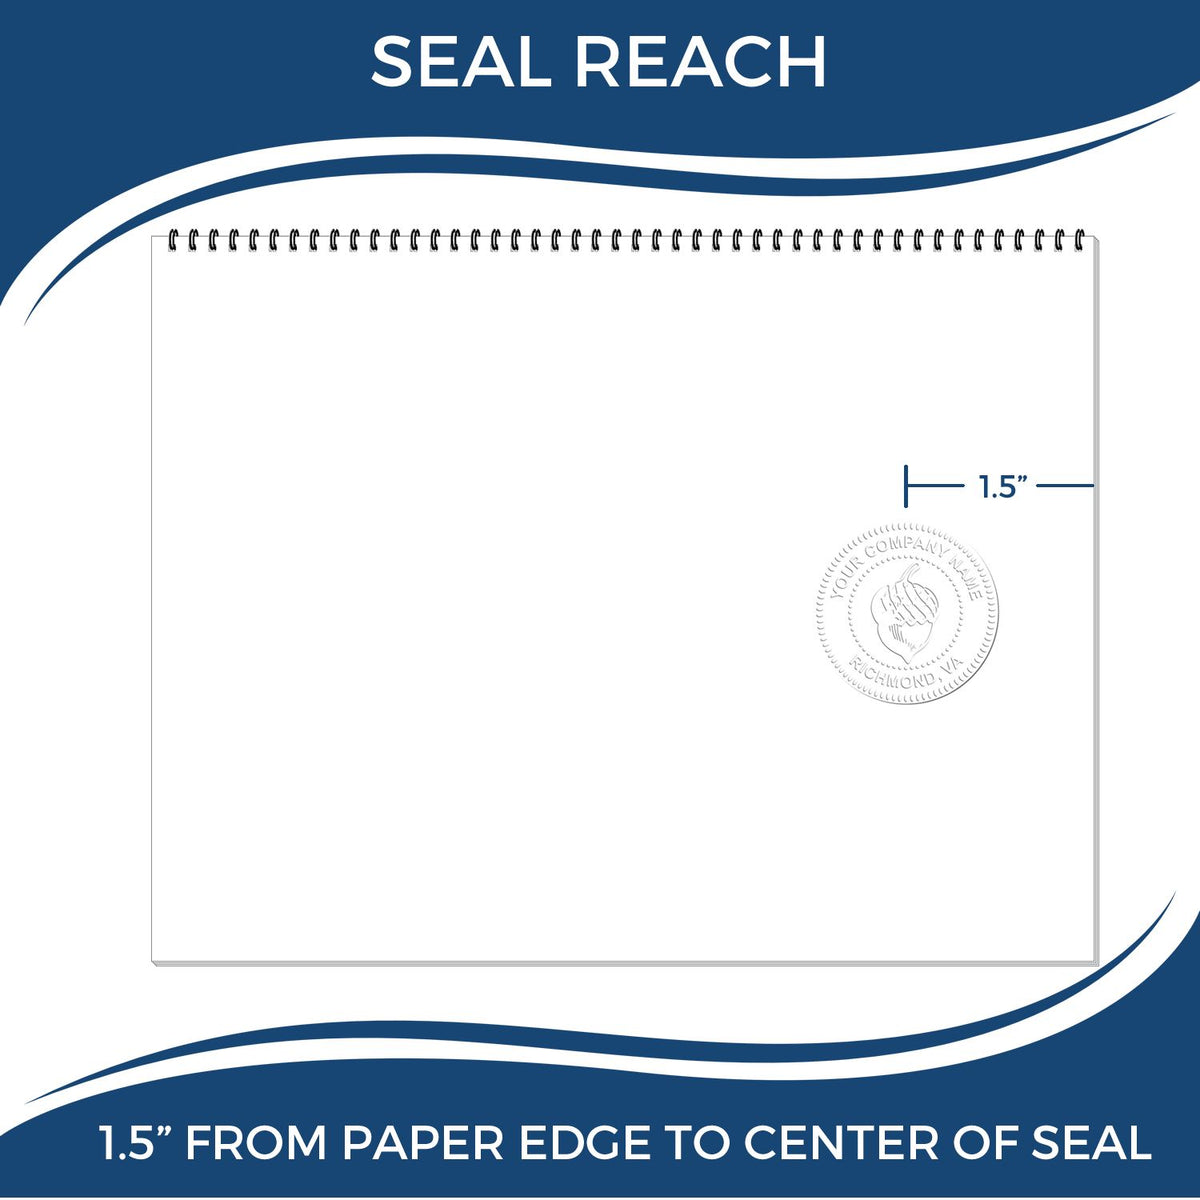 An infographic showing the seal reach which is represented by a ruler and a miniature seal image of the Gift Missouri Landscape Architect Seal